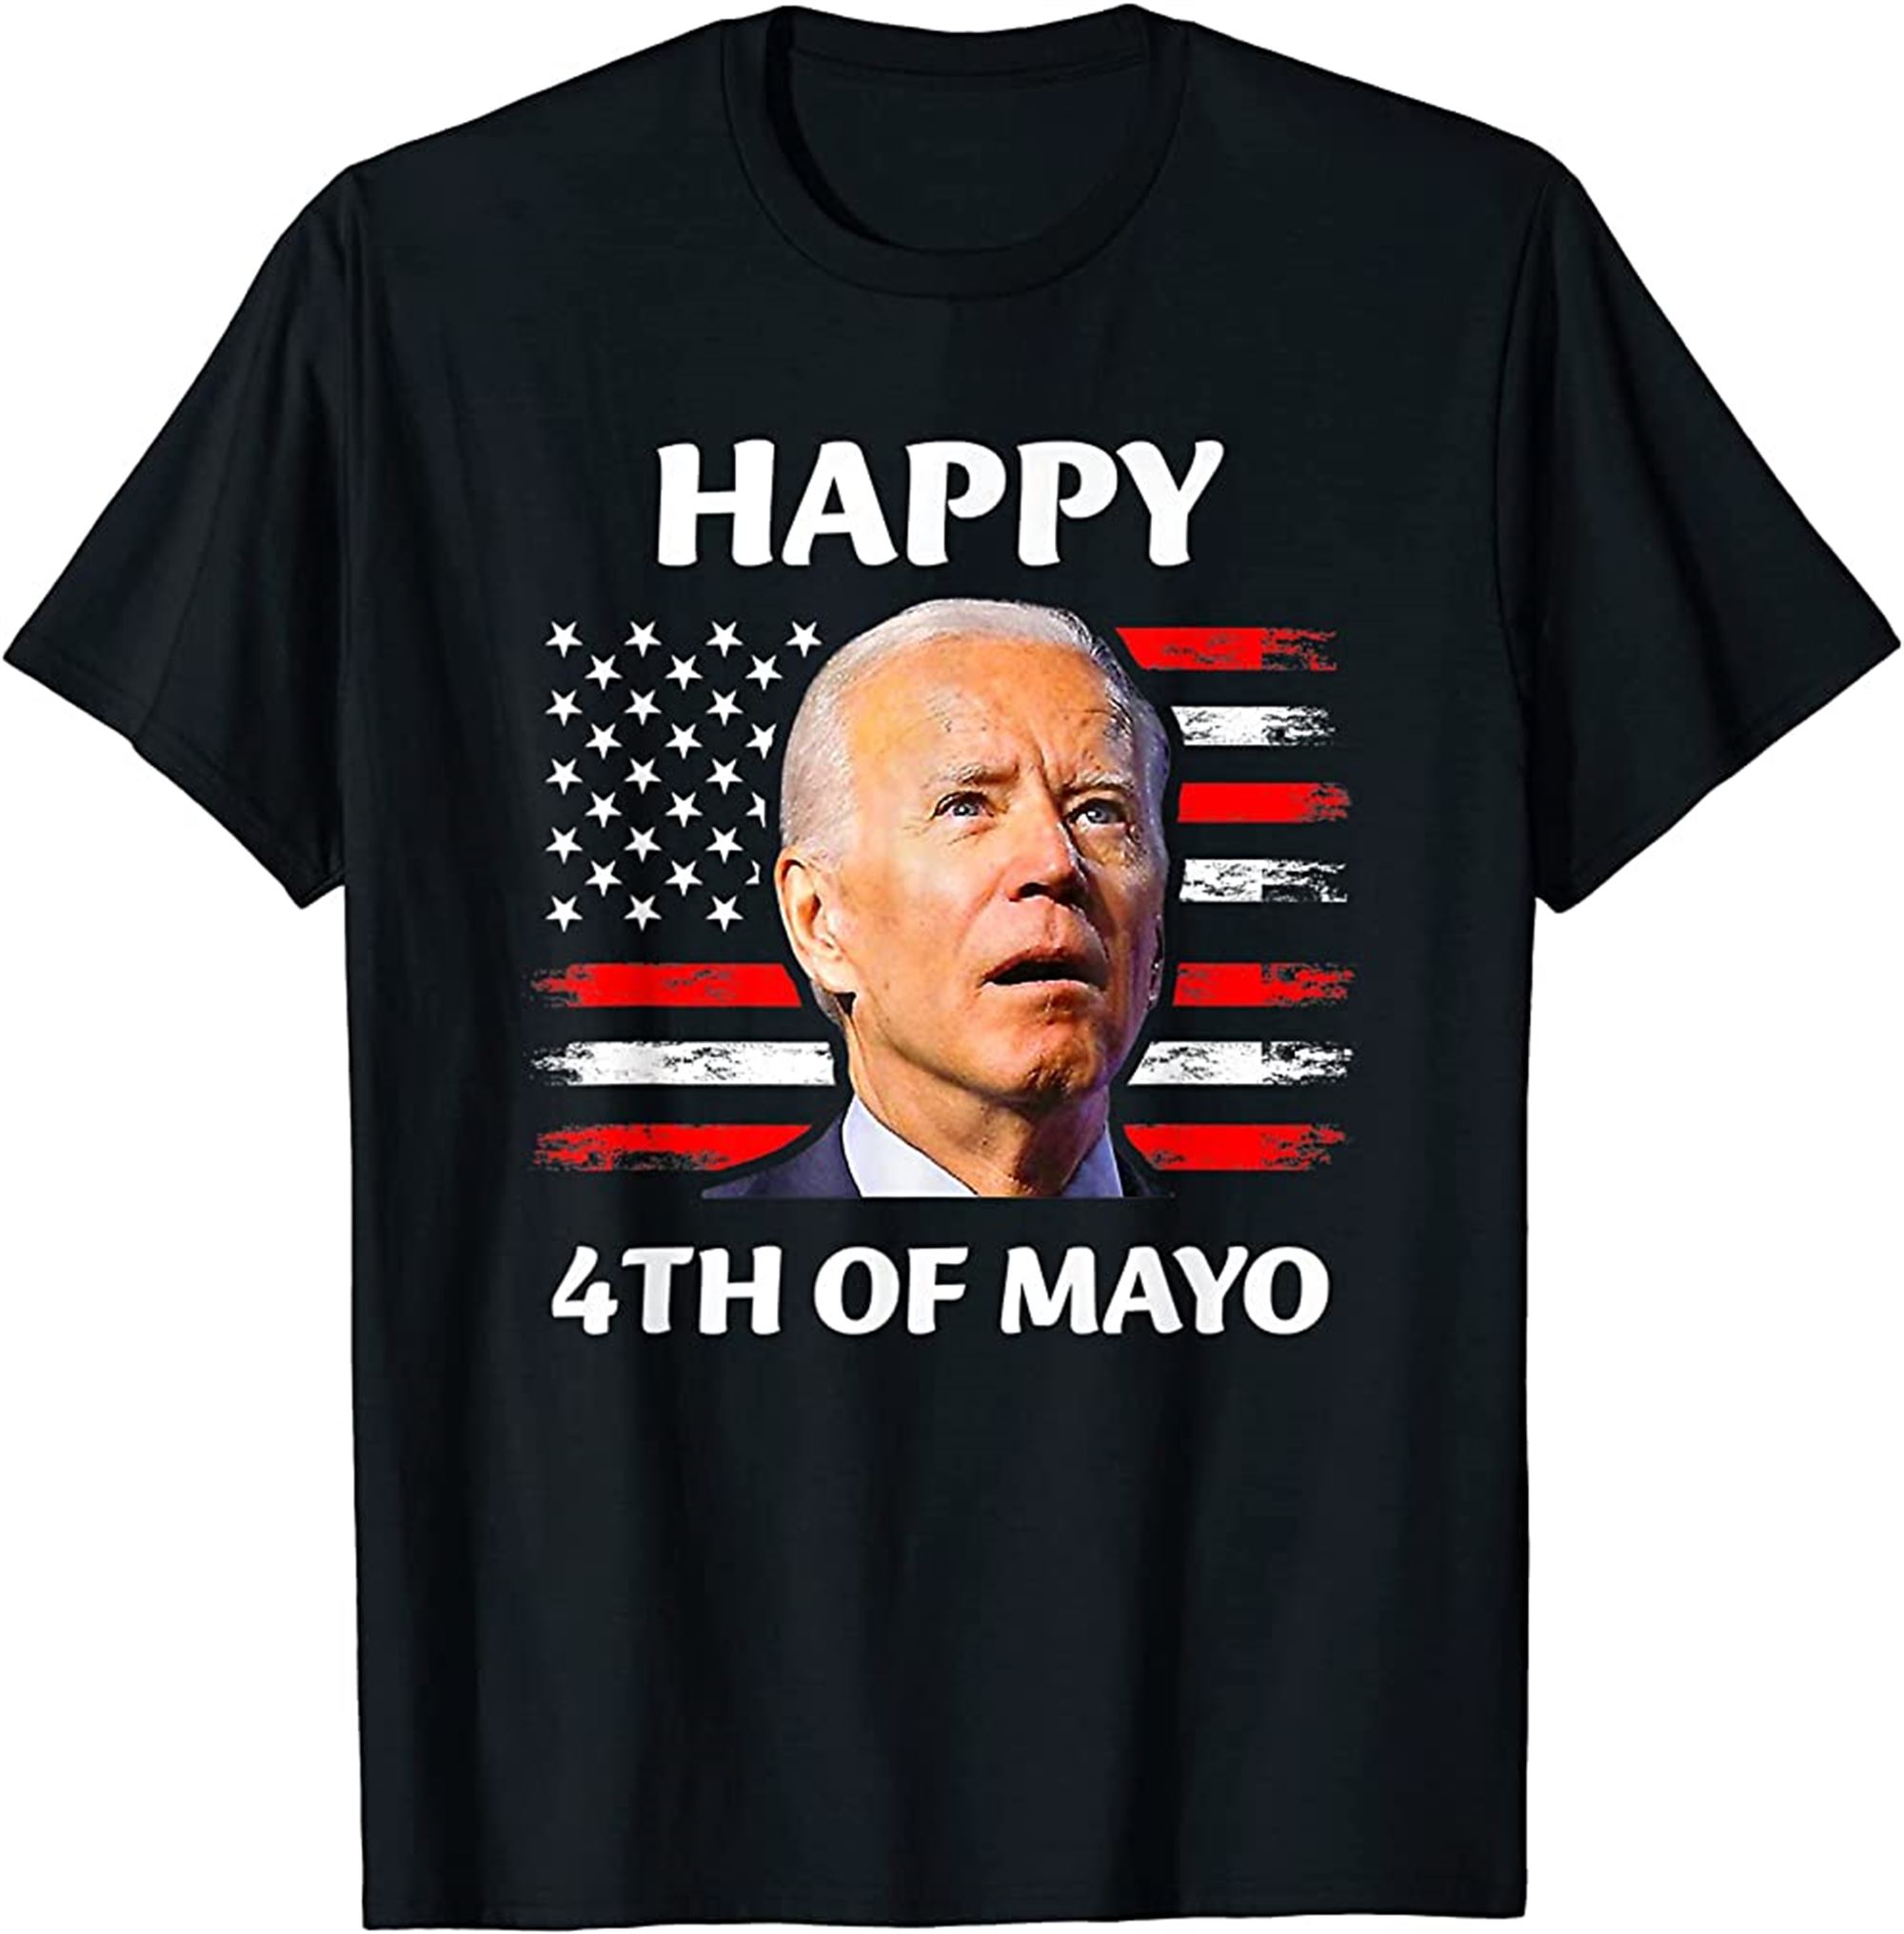 Happy 4th Of Mayo Funny Joe Biden Confused 4th Of July T-shirt Plus Size Up To 5xl